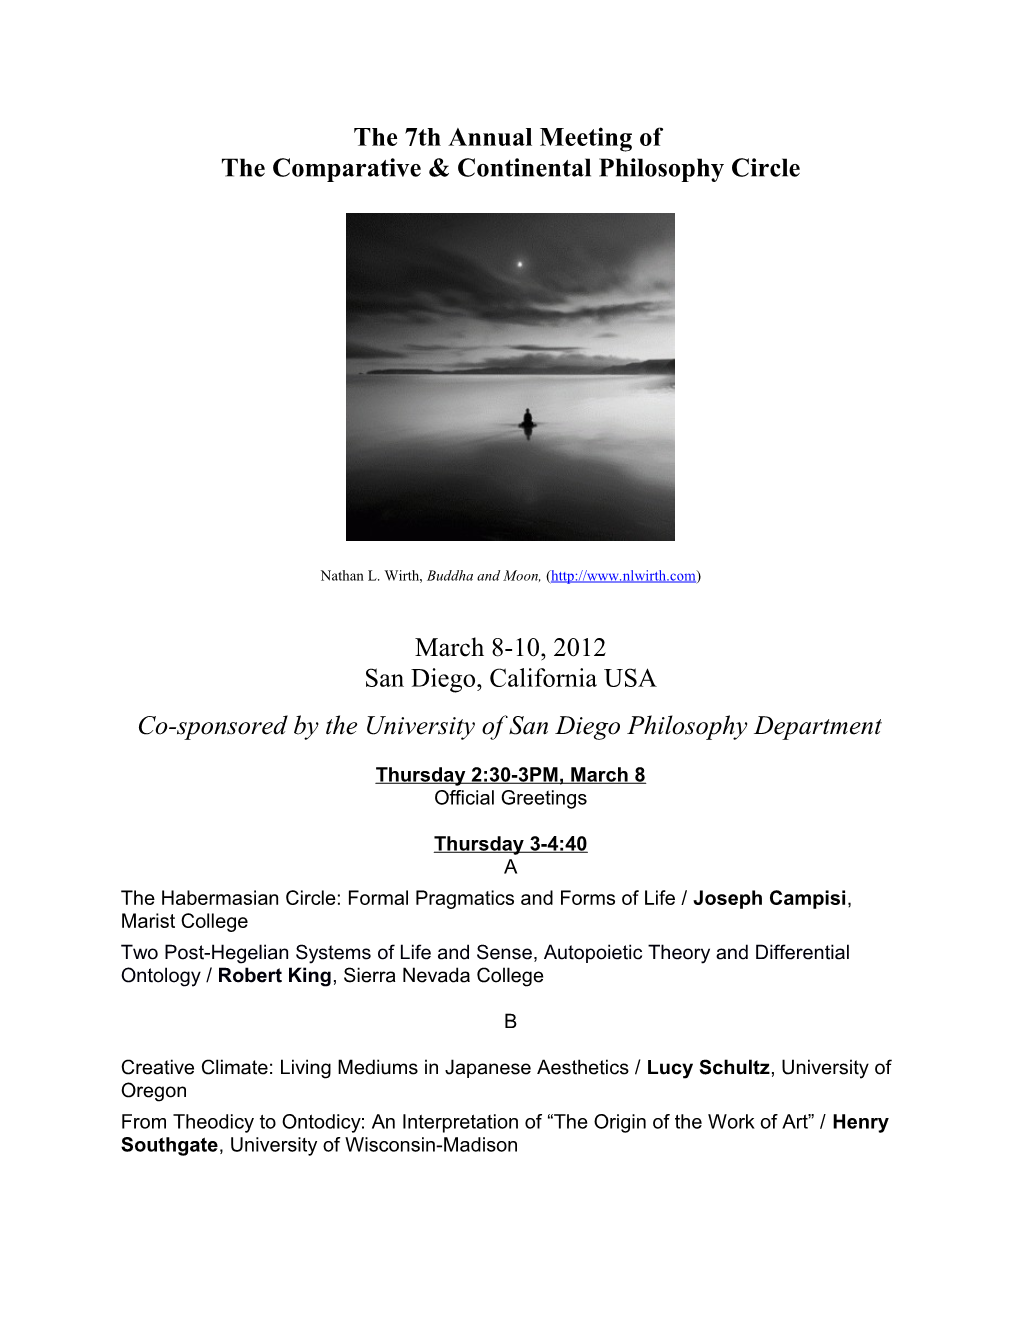 The Comparative & Continental Philosophy Circle